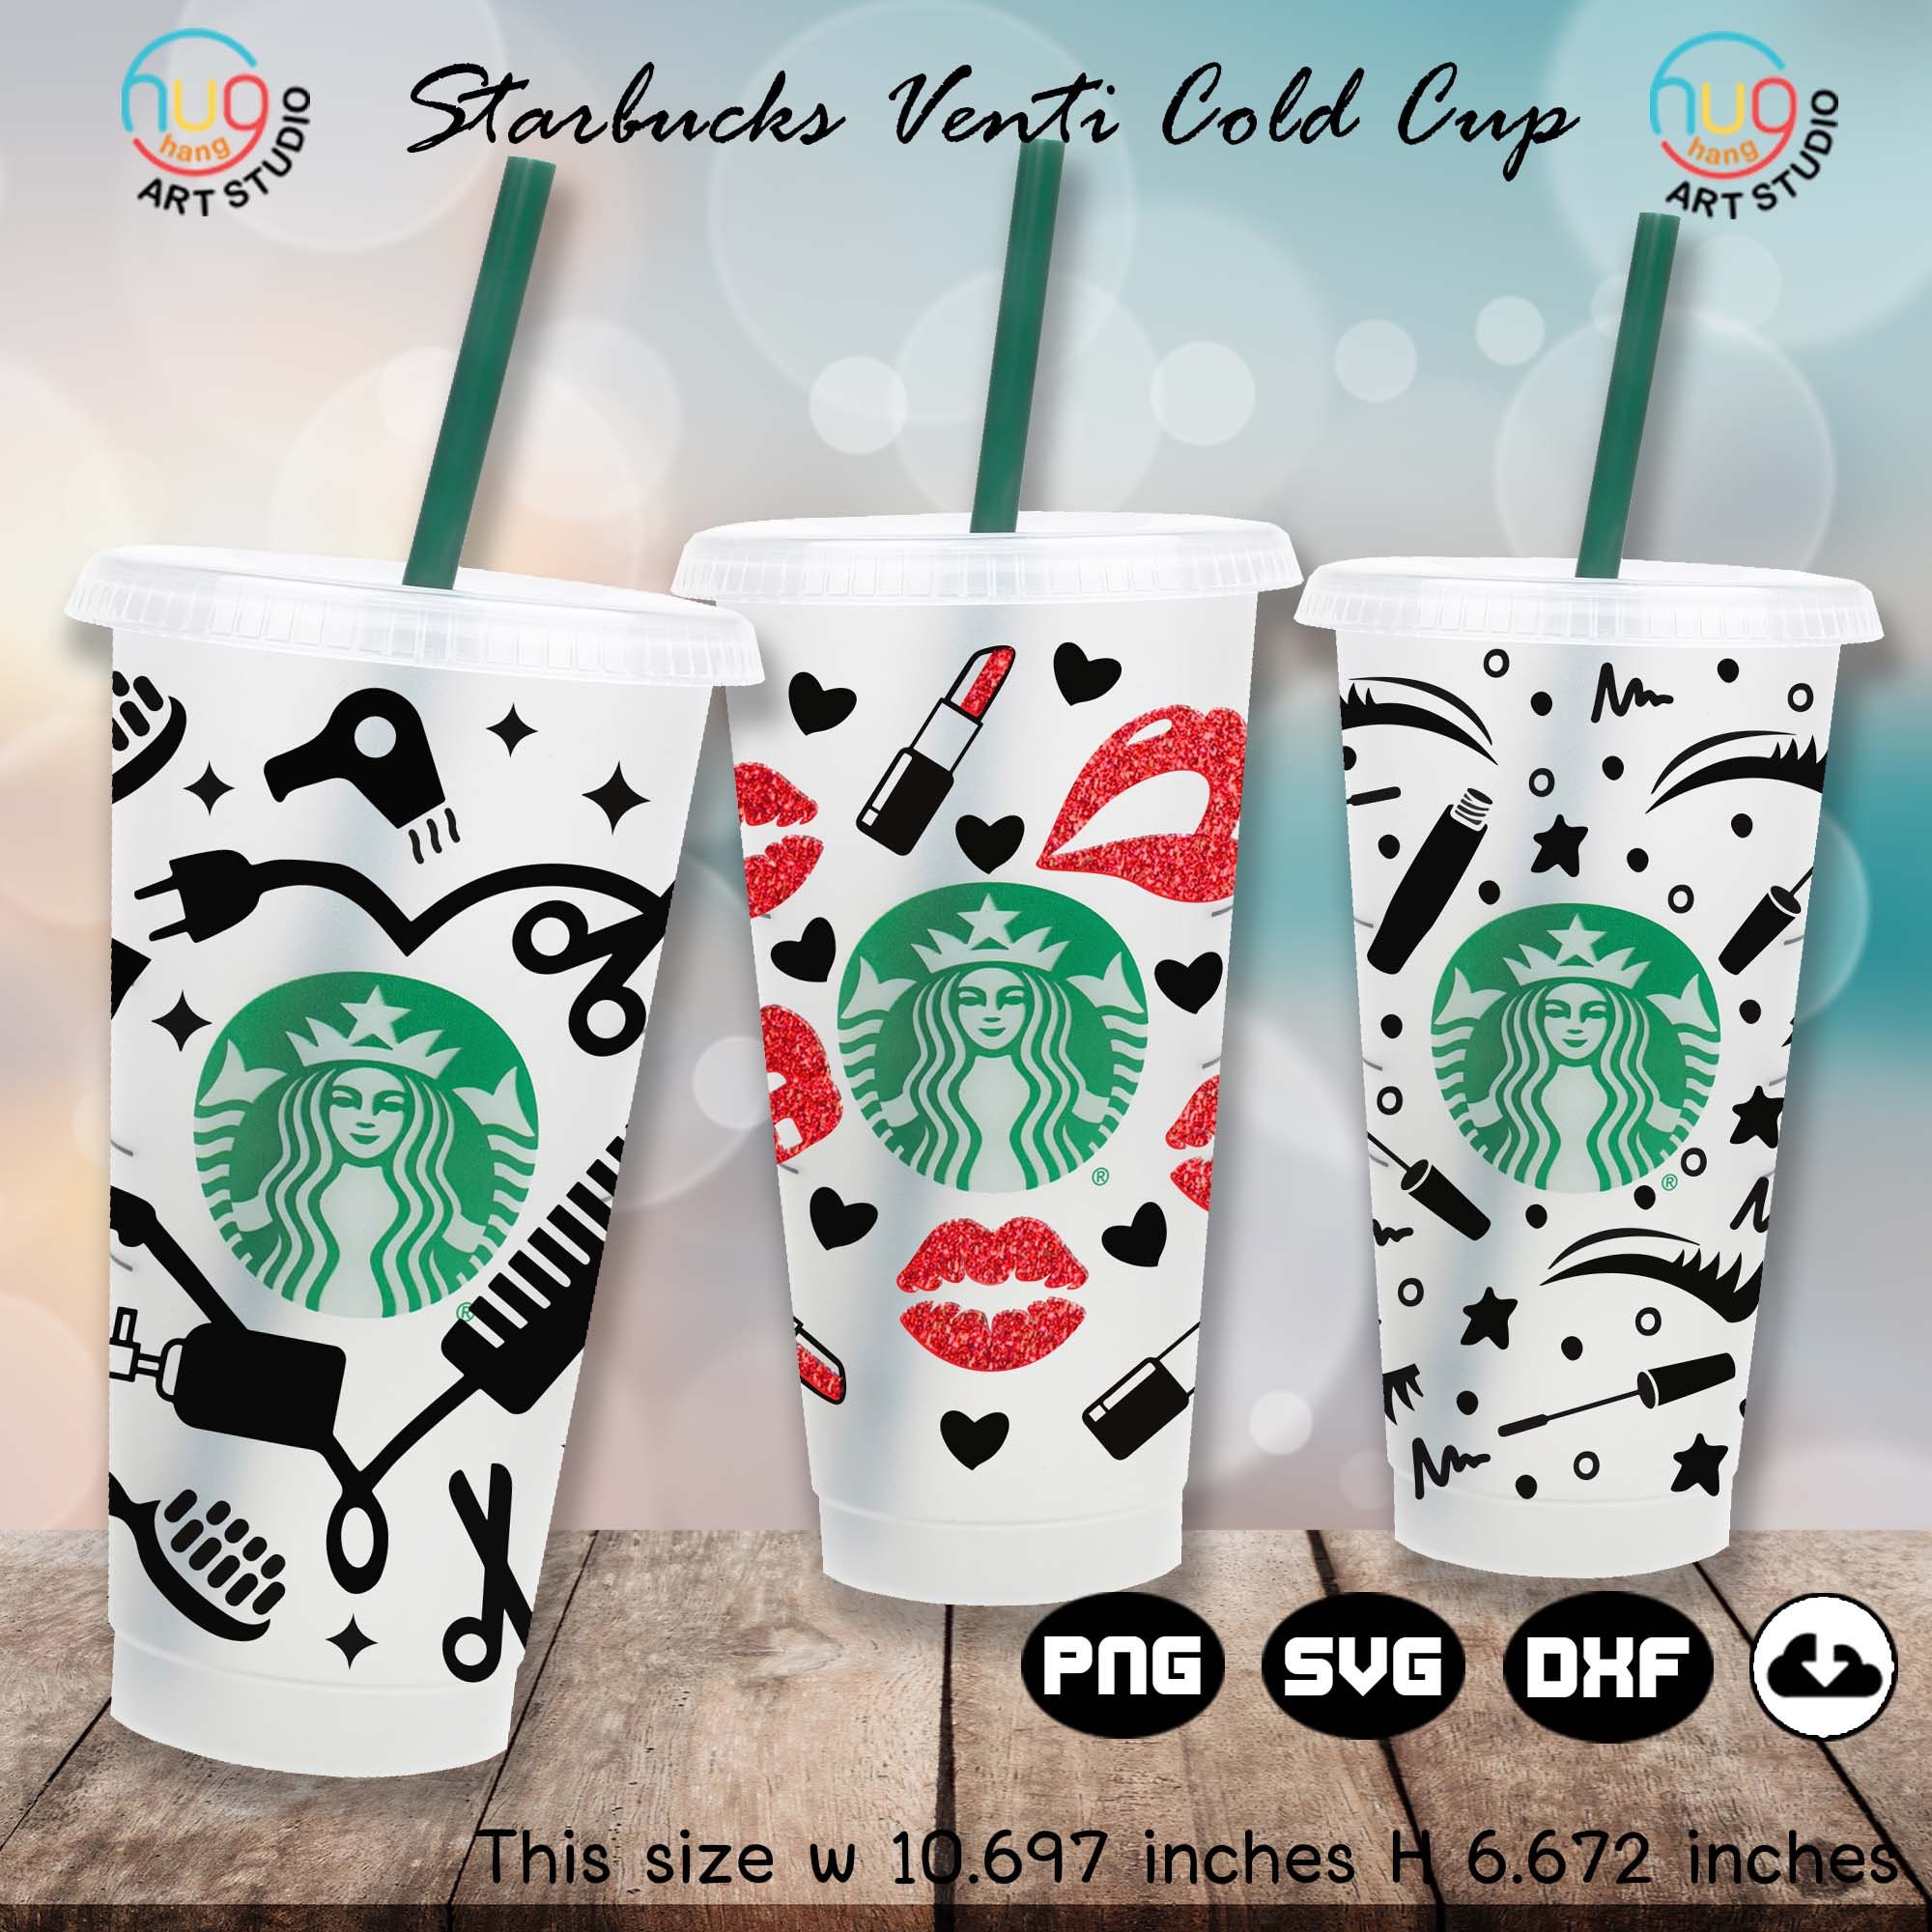 starbucks cold cup wrap Archives - Poofy Cheeks